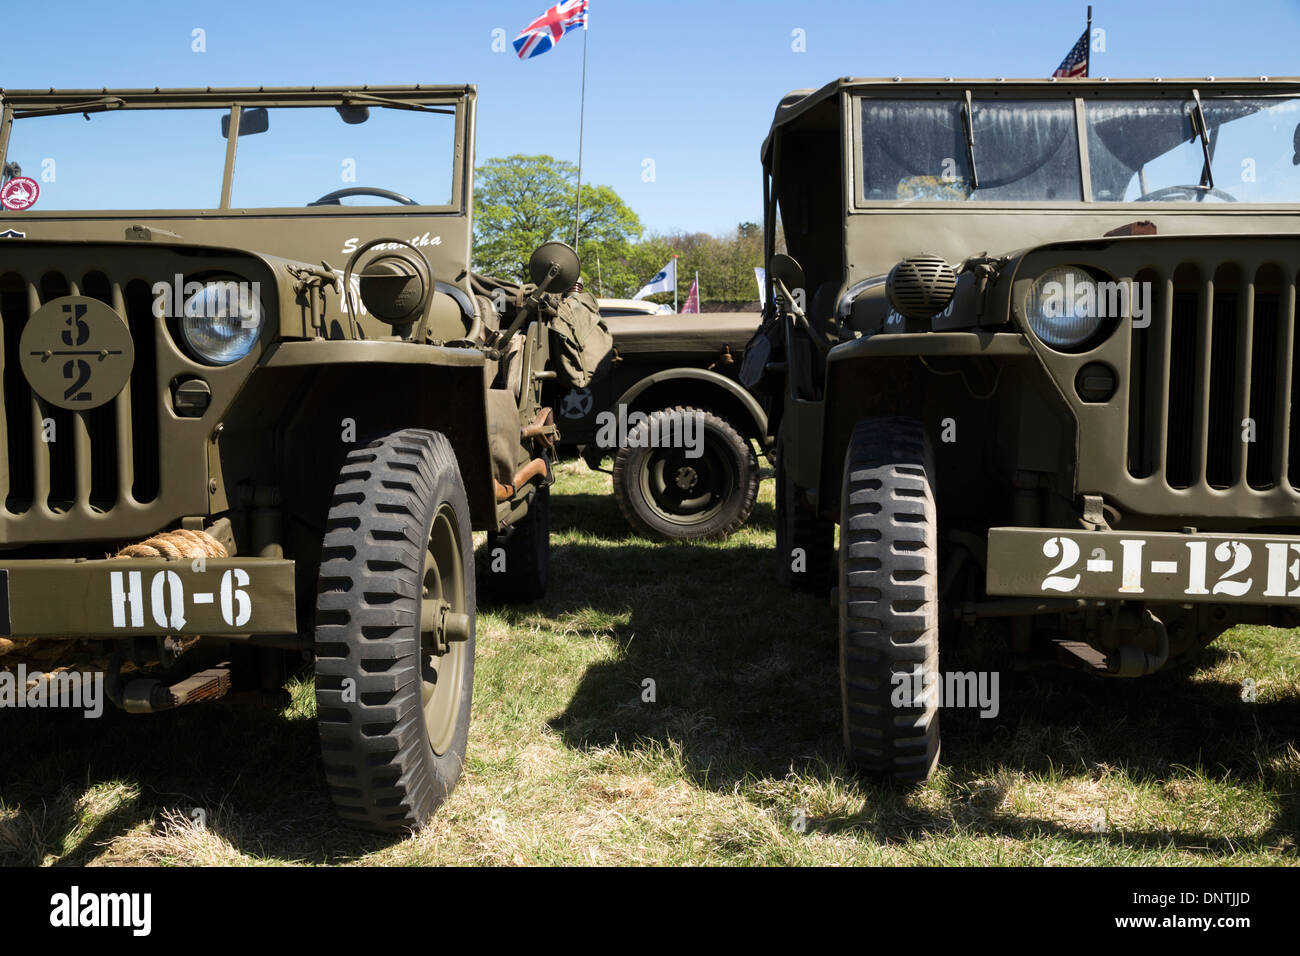 American Army Jeeps at Gawsworth Hall Classic car Show Stock Photo